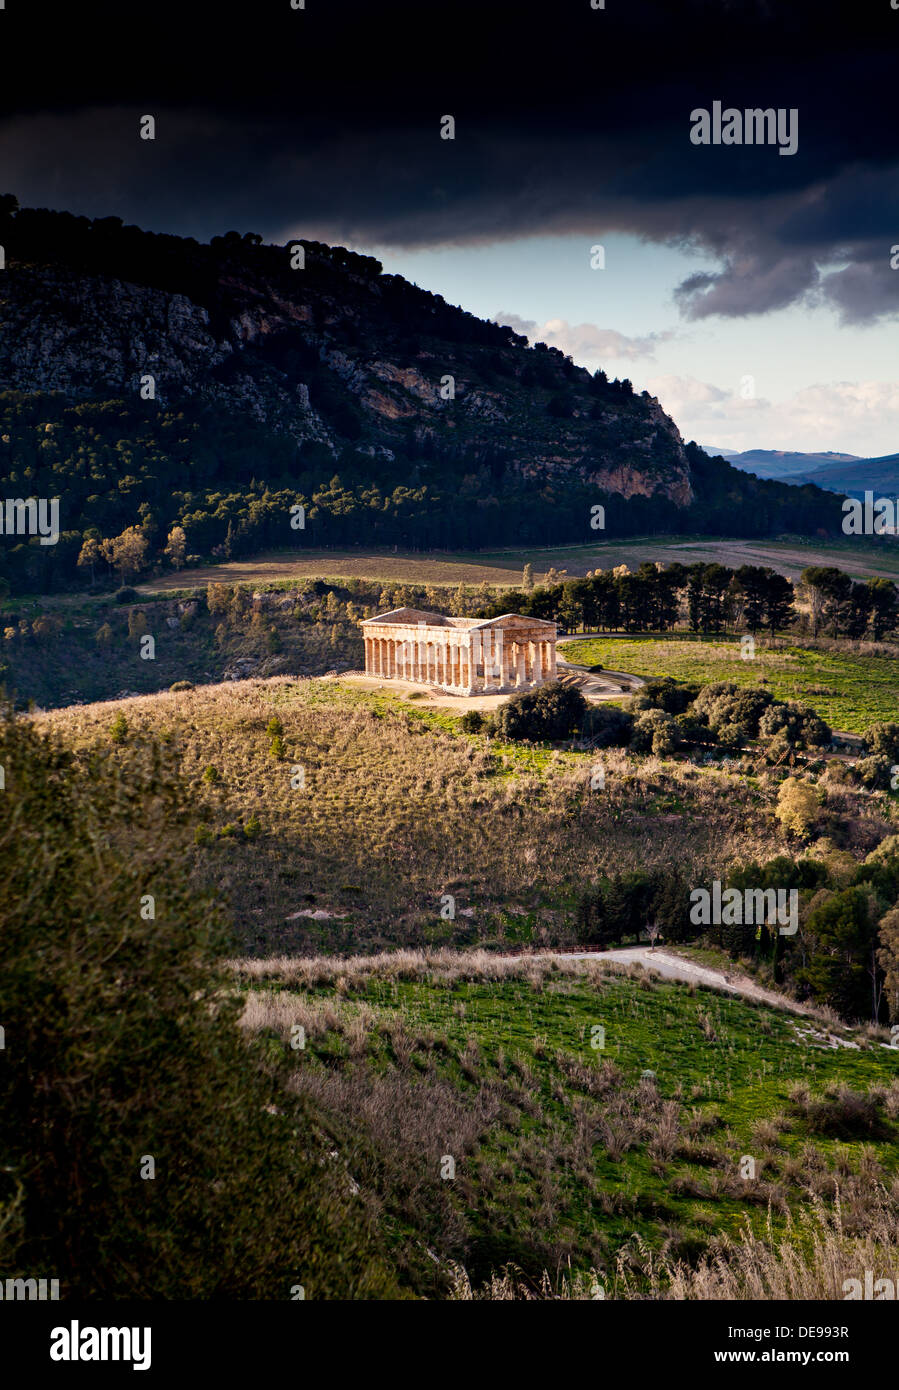 The Greek Temple of Segesta in the Province of Trapani, Sicily. Stock Photo